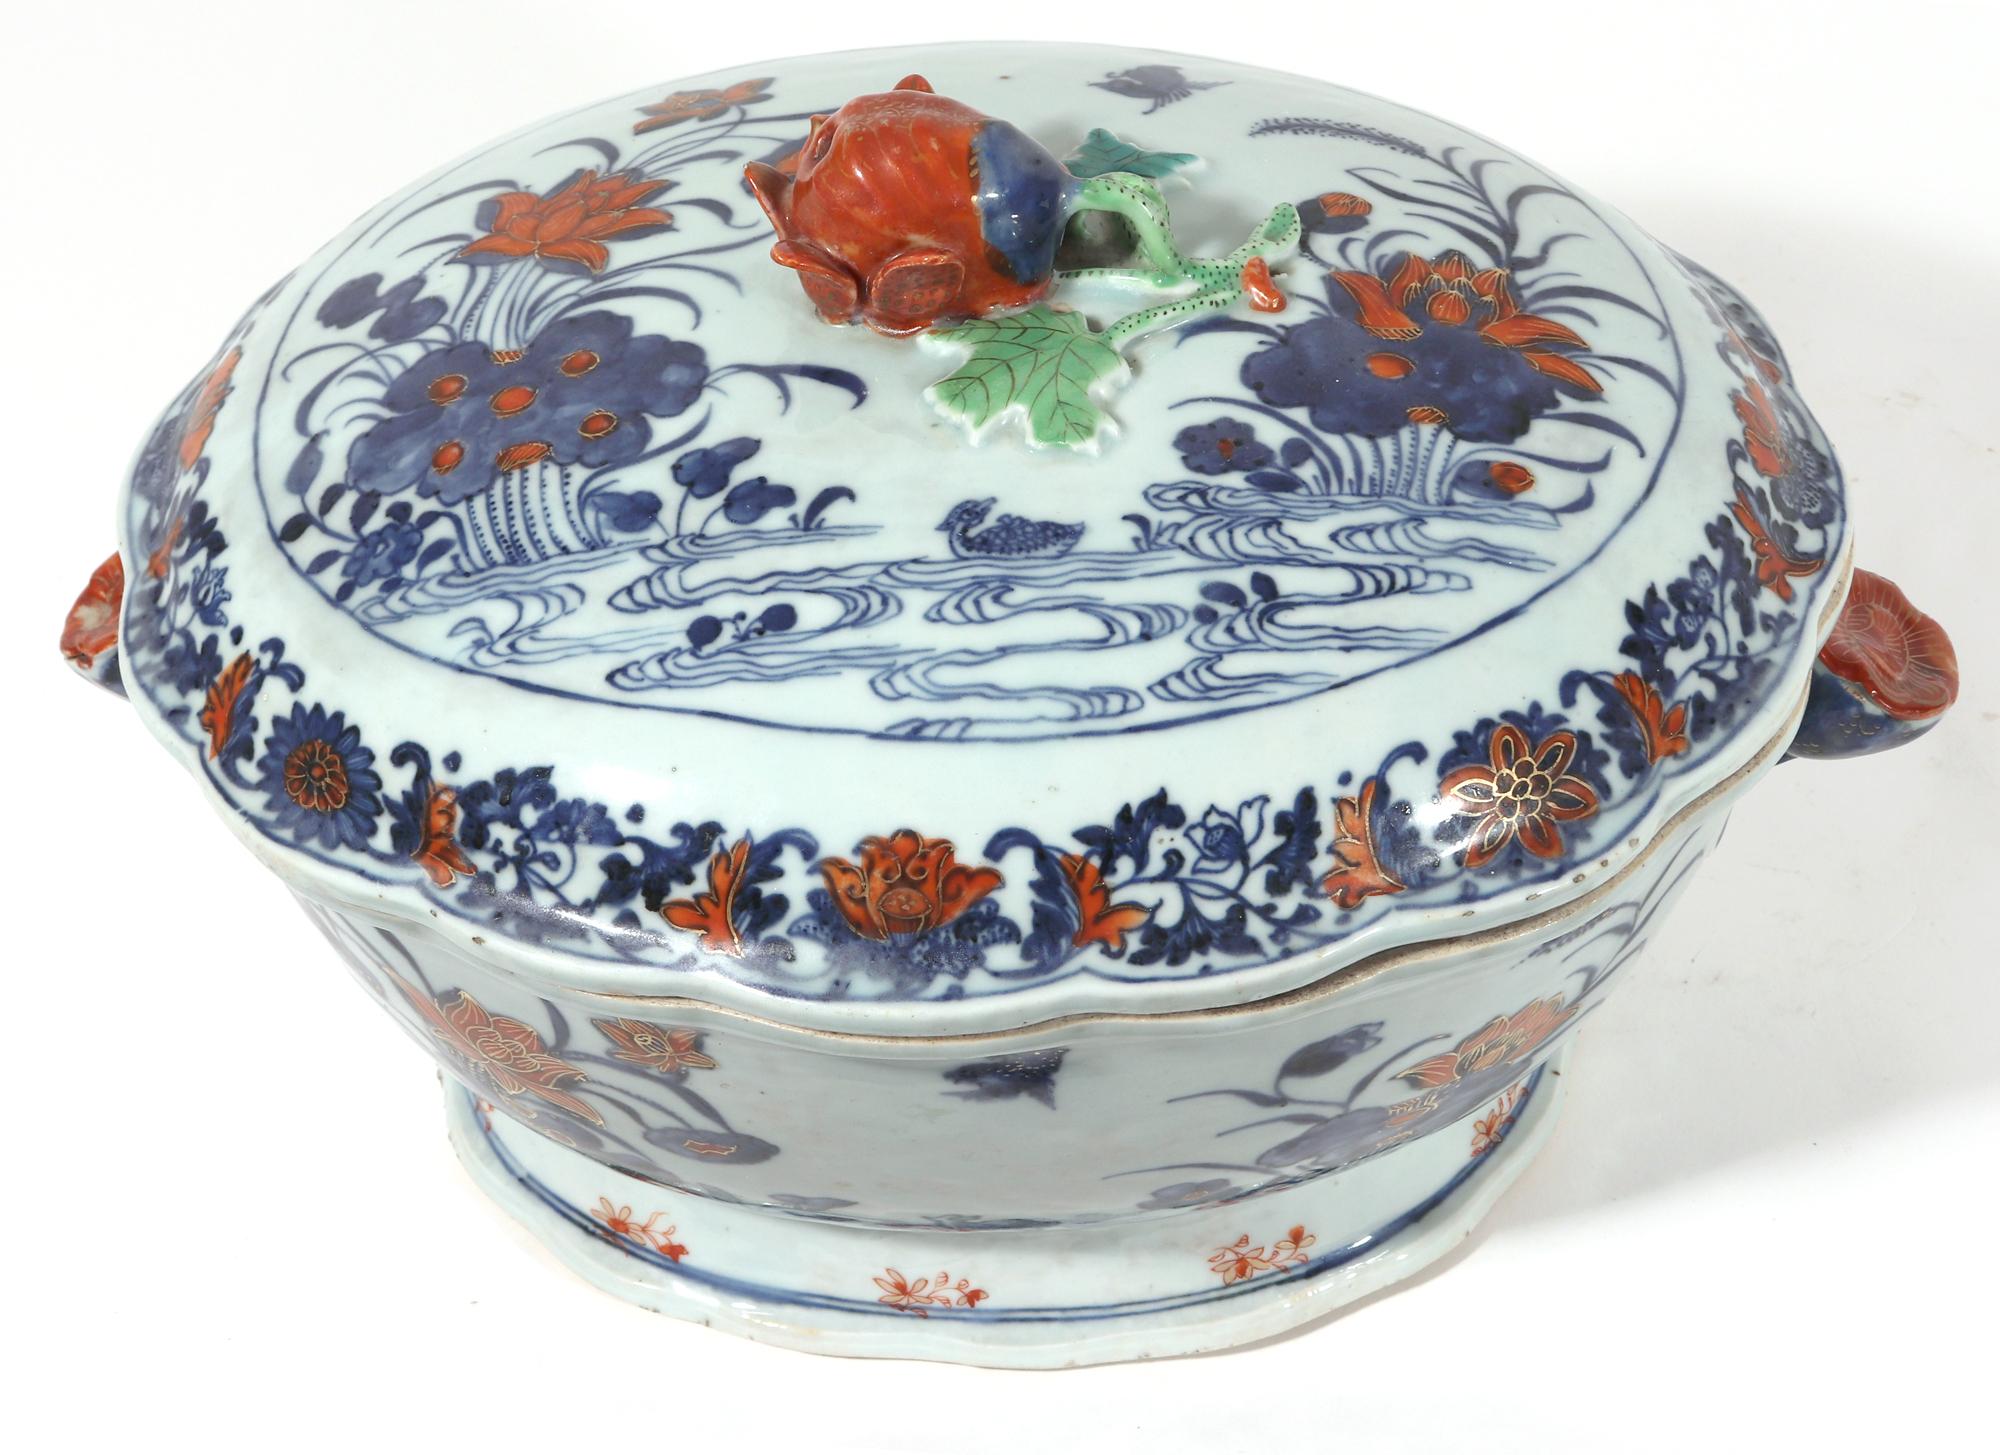 Late 18th Century 18th Century Chinese Export Porcelain Imari Tureen and Cover-Duck in Pond For Sale